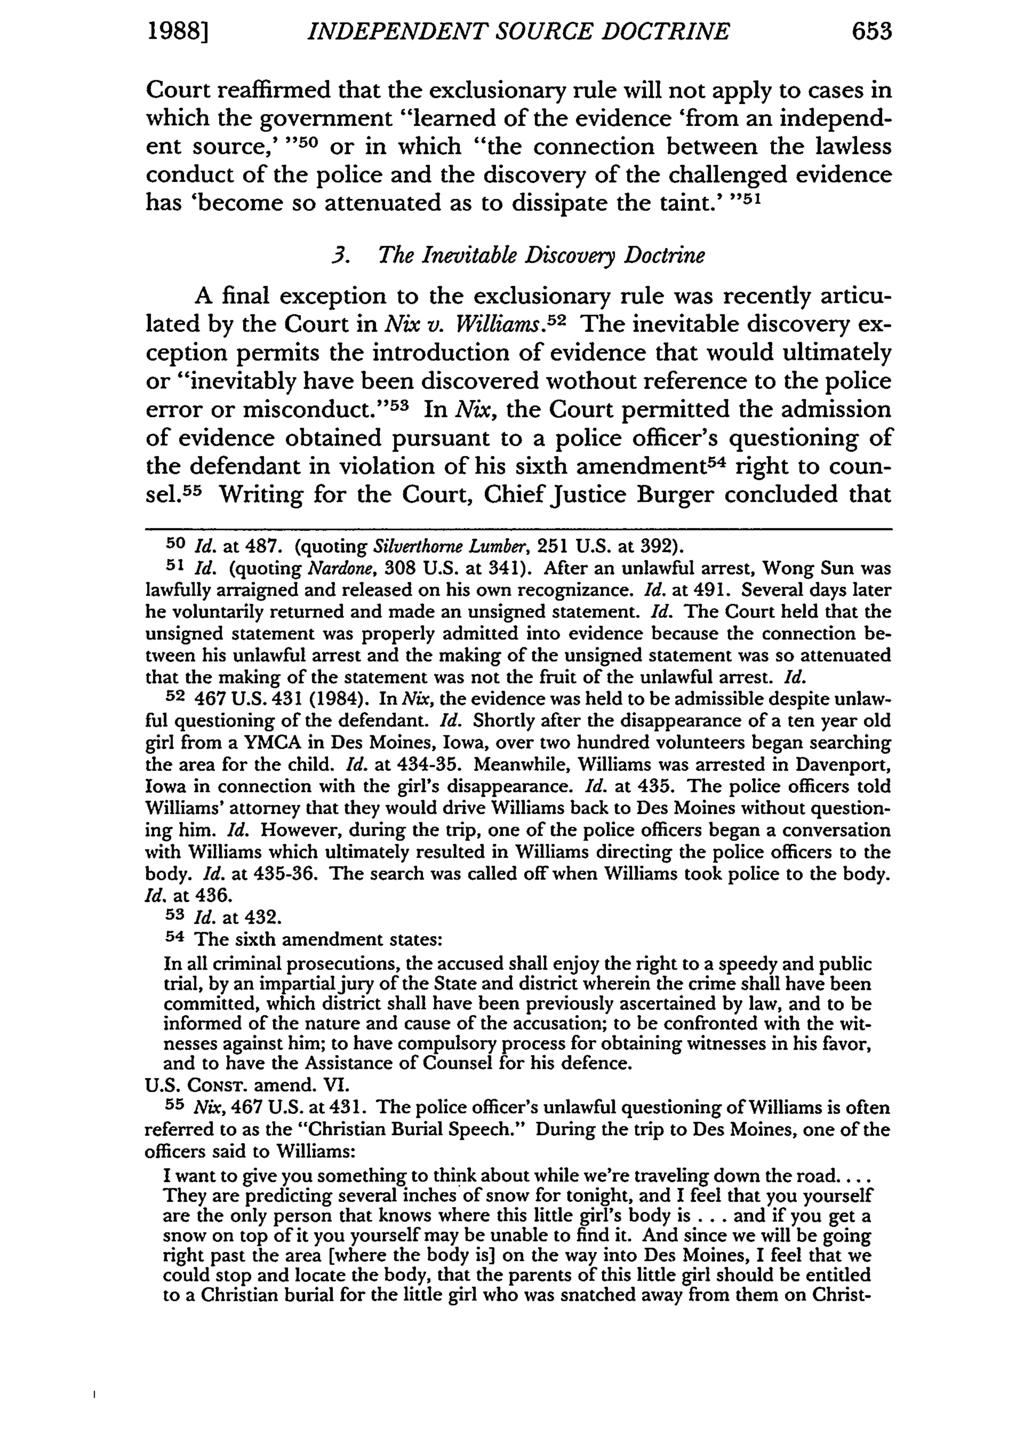 1988] INDEPENDENT SOURCE DOCTRINE Court reaffirmed that the exclusionary rule will not apply to cases in which the government "learned of the evidence 'from an independent source,'"50 or in which